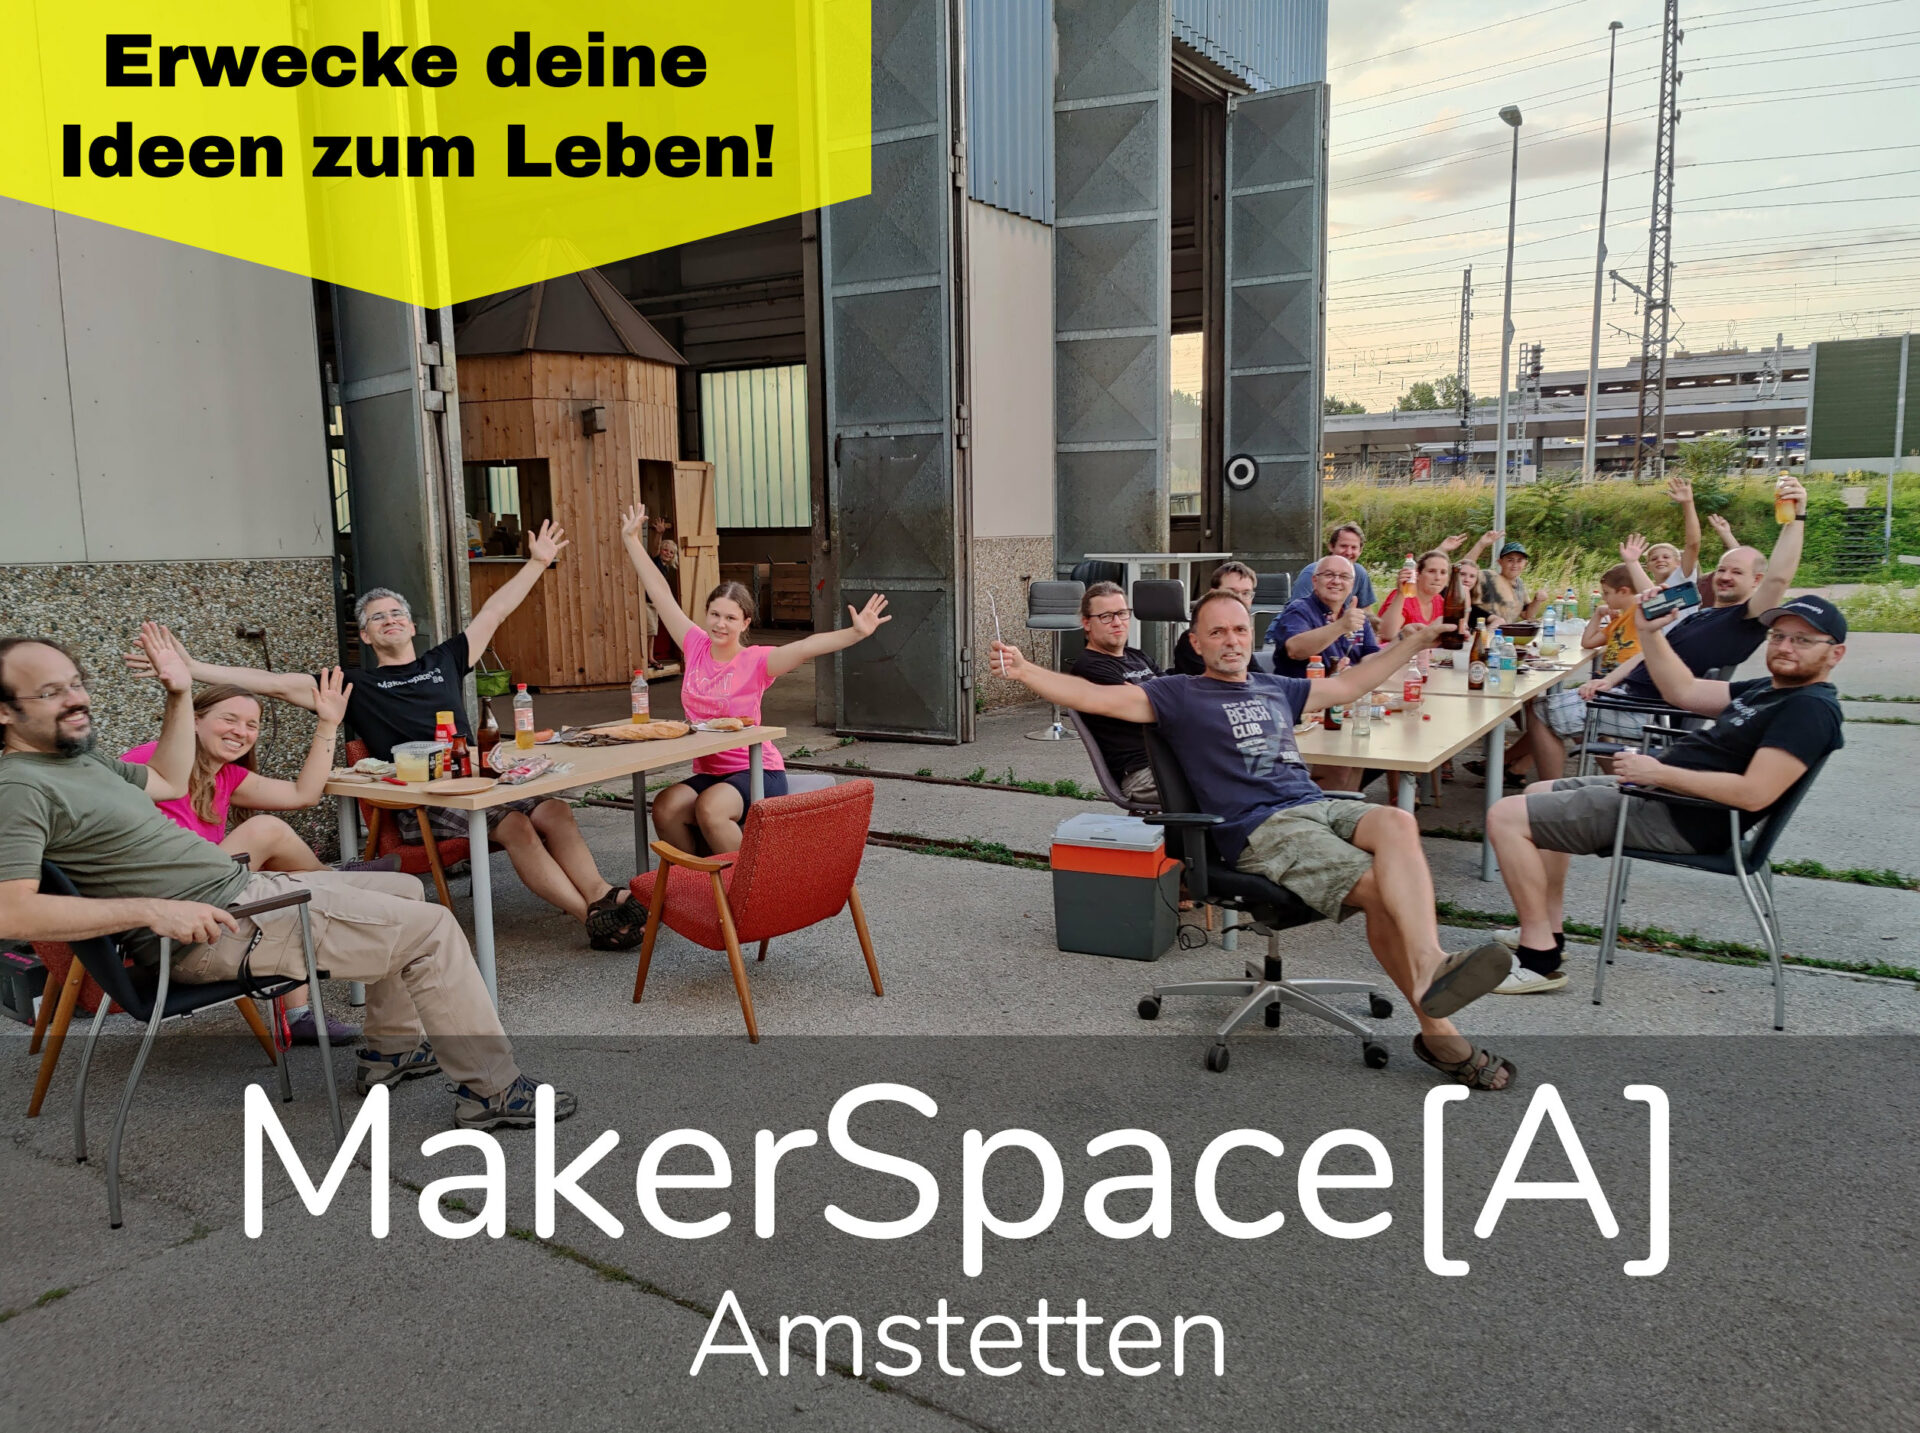 (c) Makerspace-amstetten.at